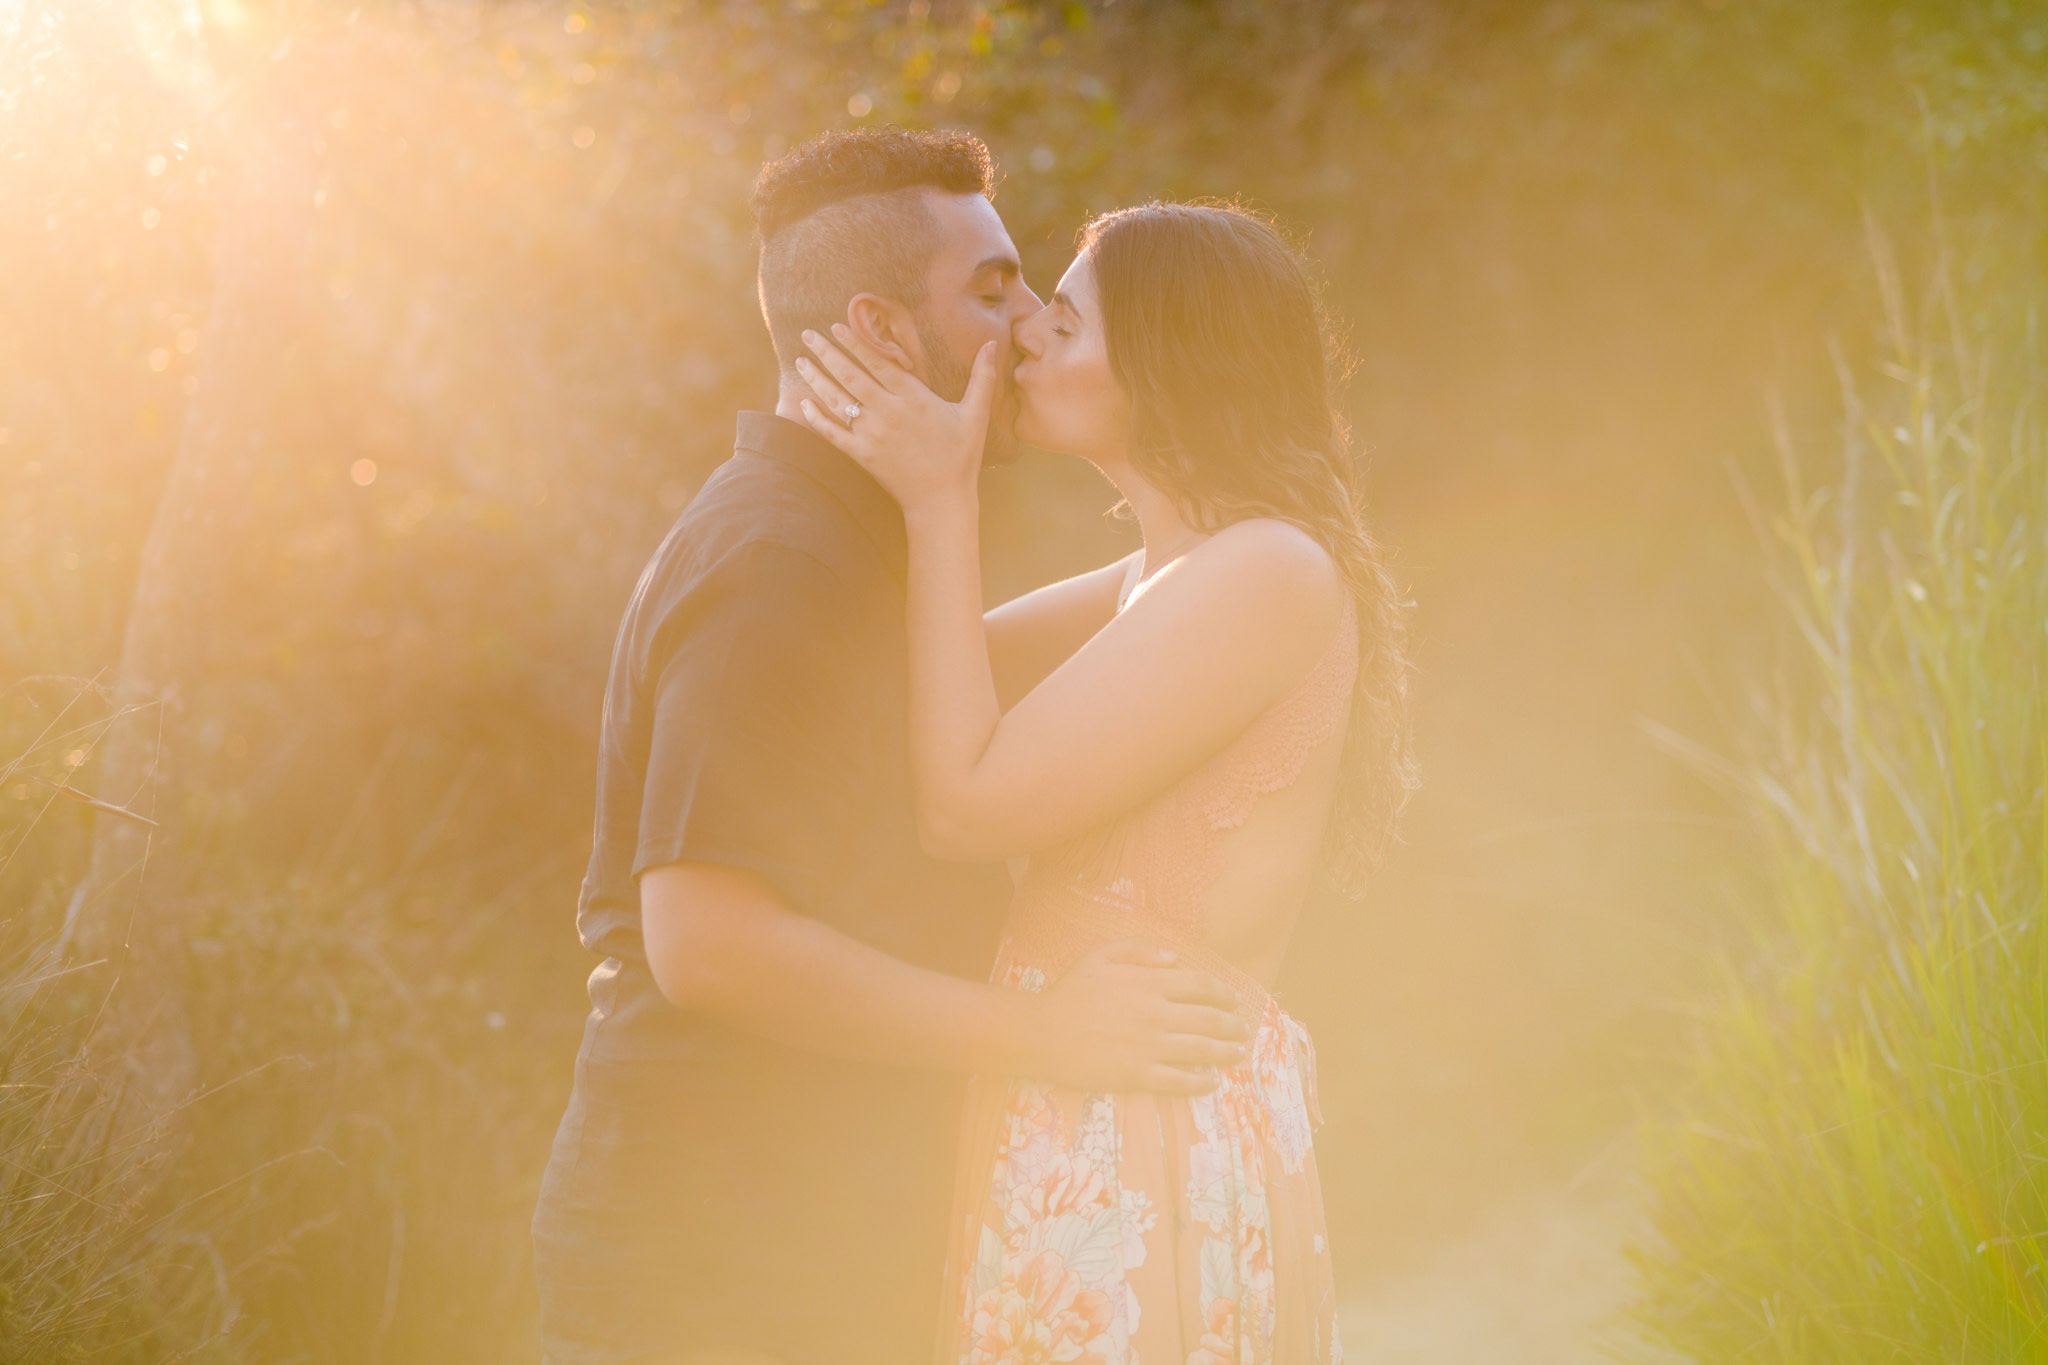 Couple kissing with backlight and sun flares around them